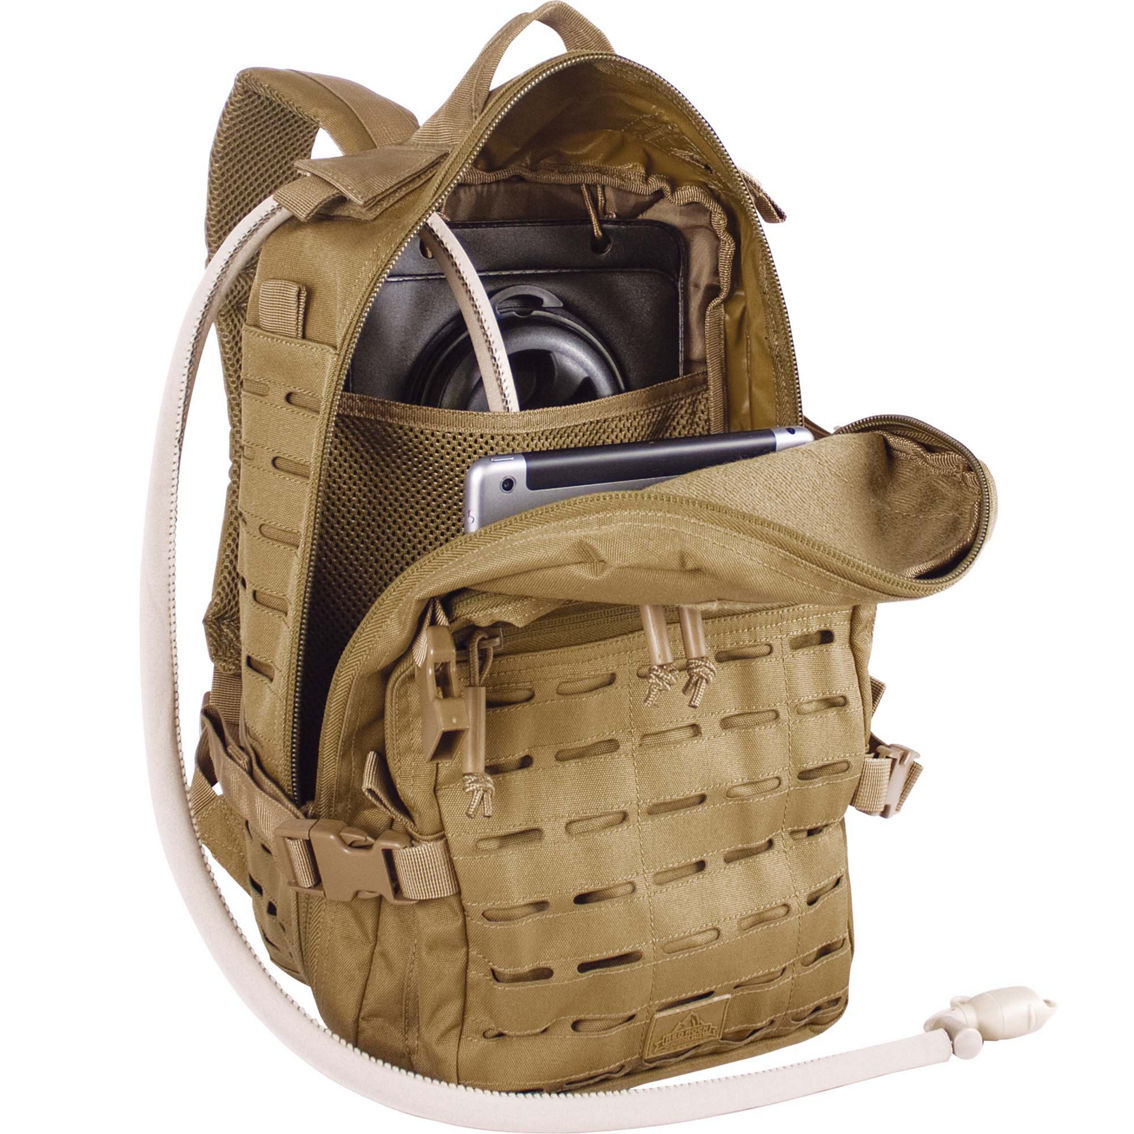 Red Rock Outdoor Gear Transporter Day Pack - Image 6 of 9